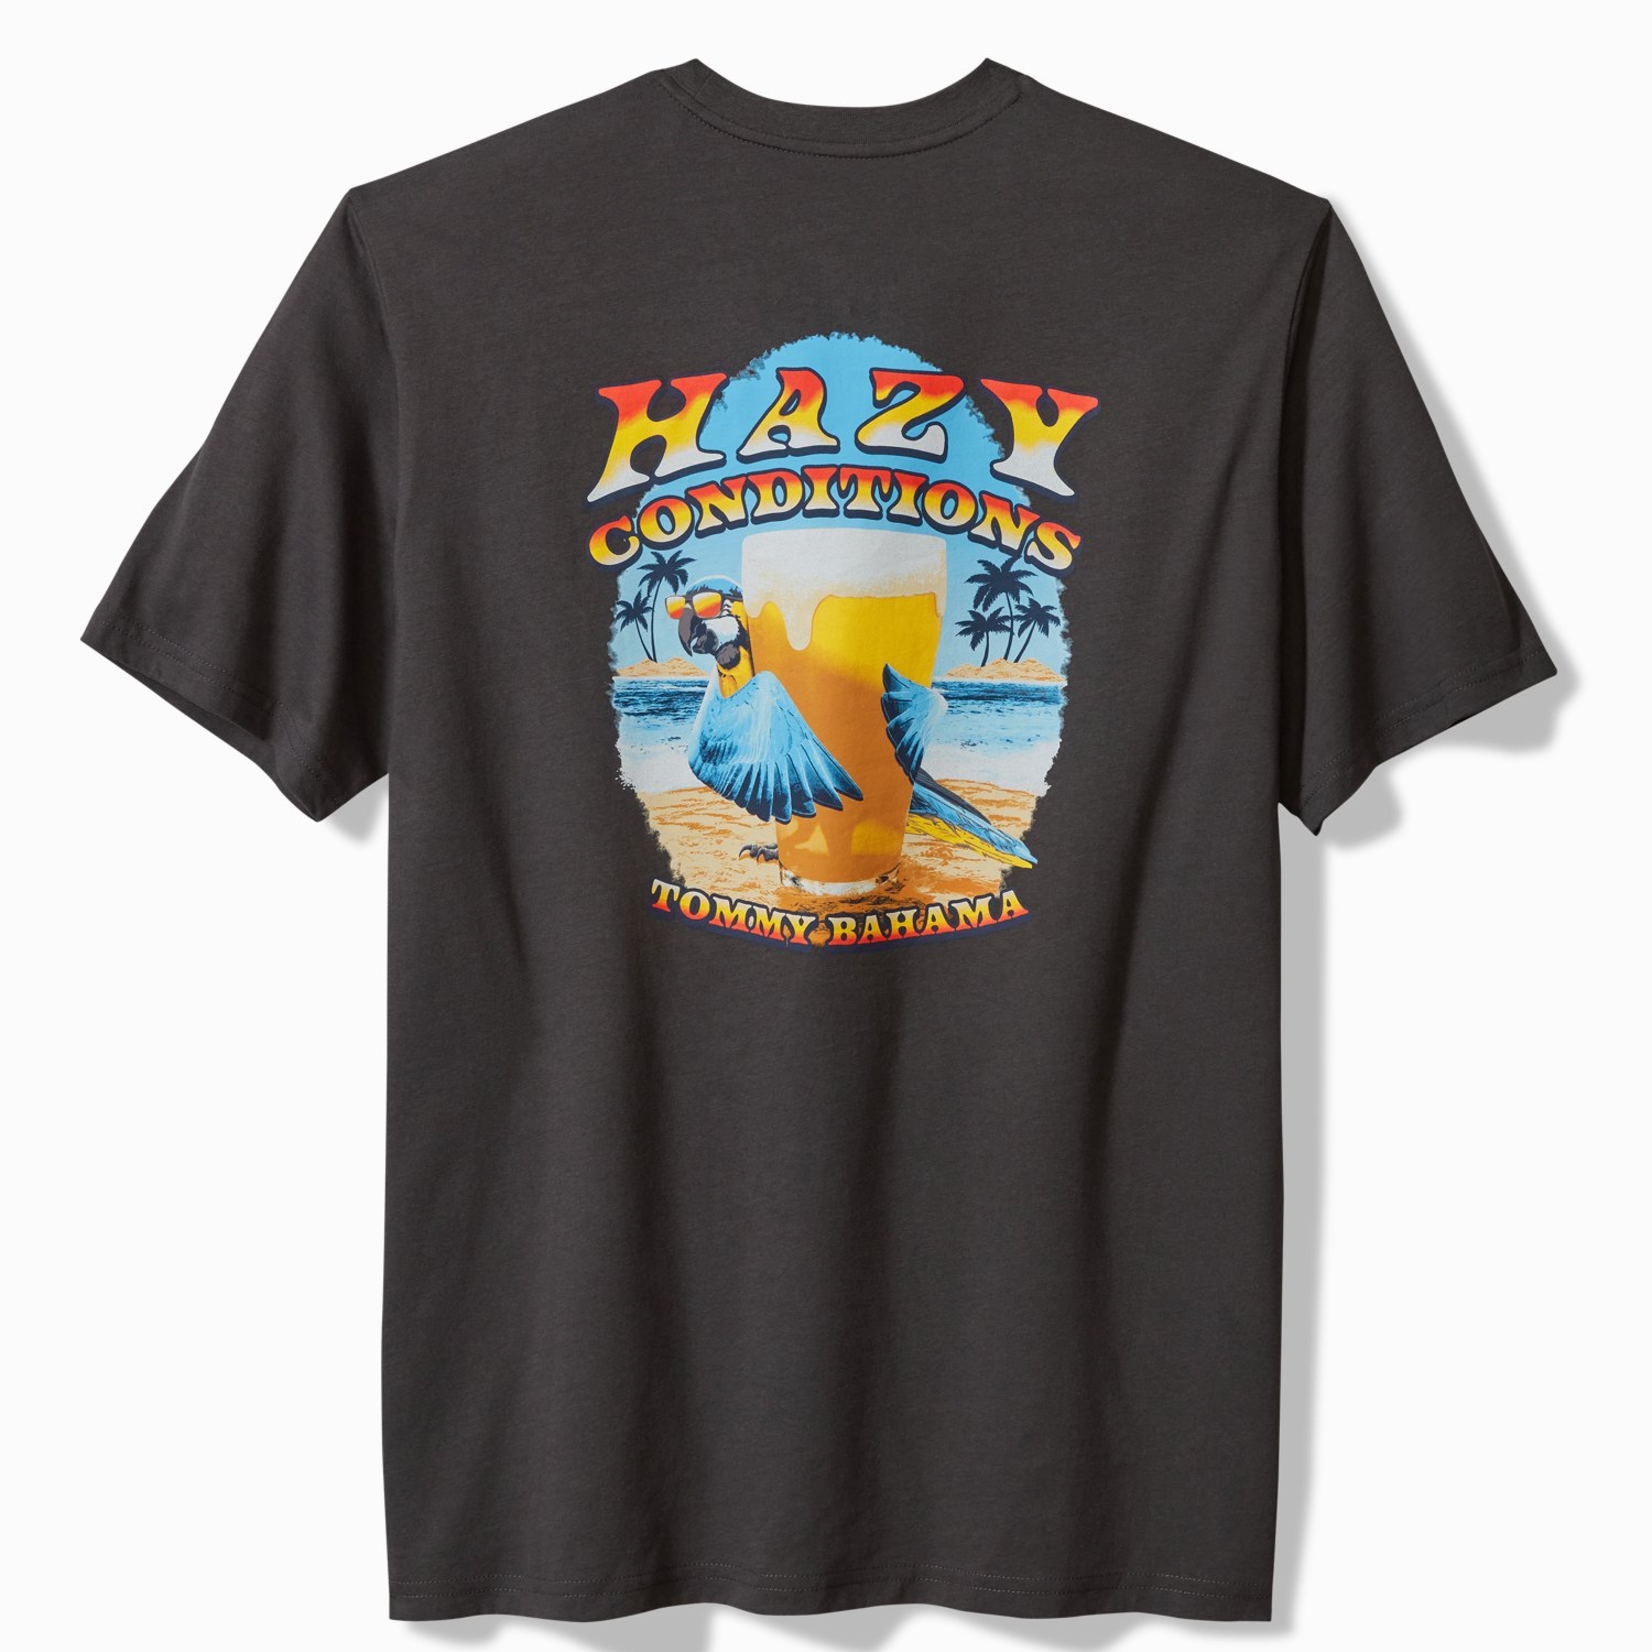 Tommy Bahama Hazy Conditions Graphic T-Shirt